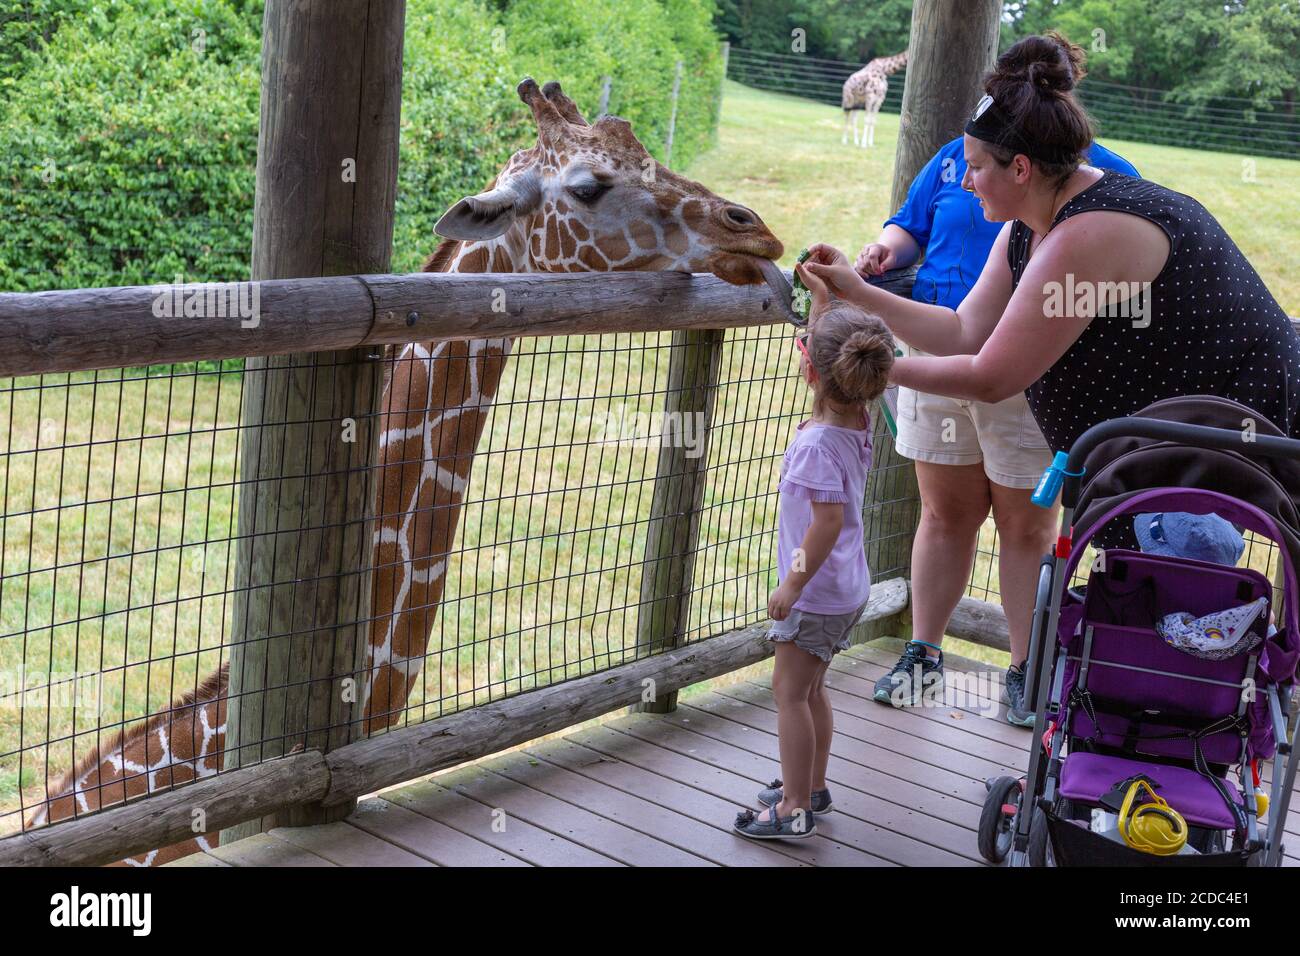 A young girl and her mother feed a giraffe at the Fort Wayne Children's Zoo in Fort Wayne, Indiana, USA. Stock Photo